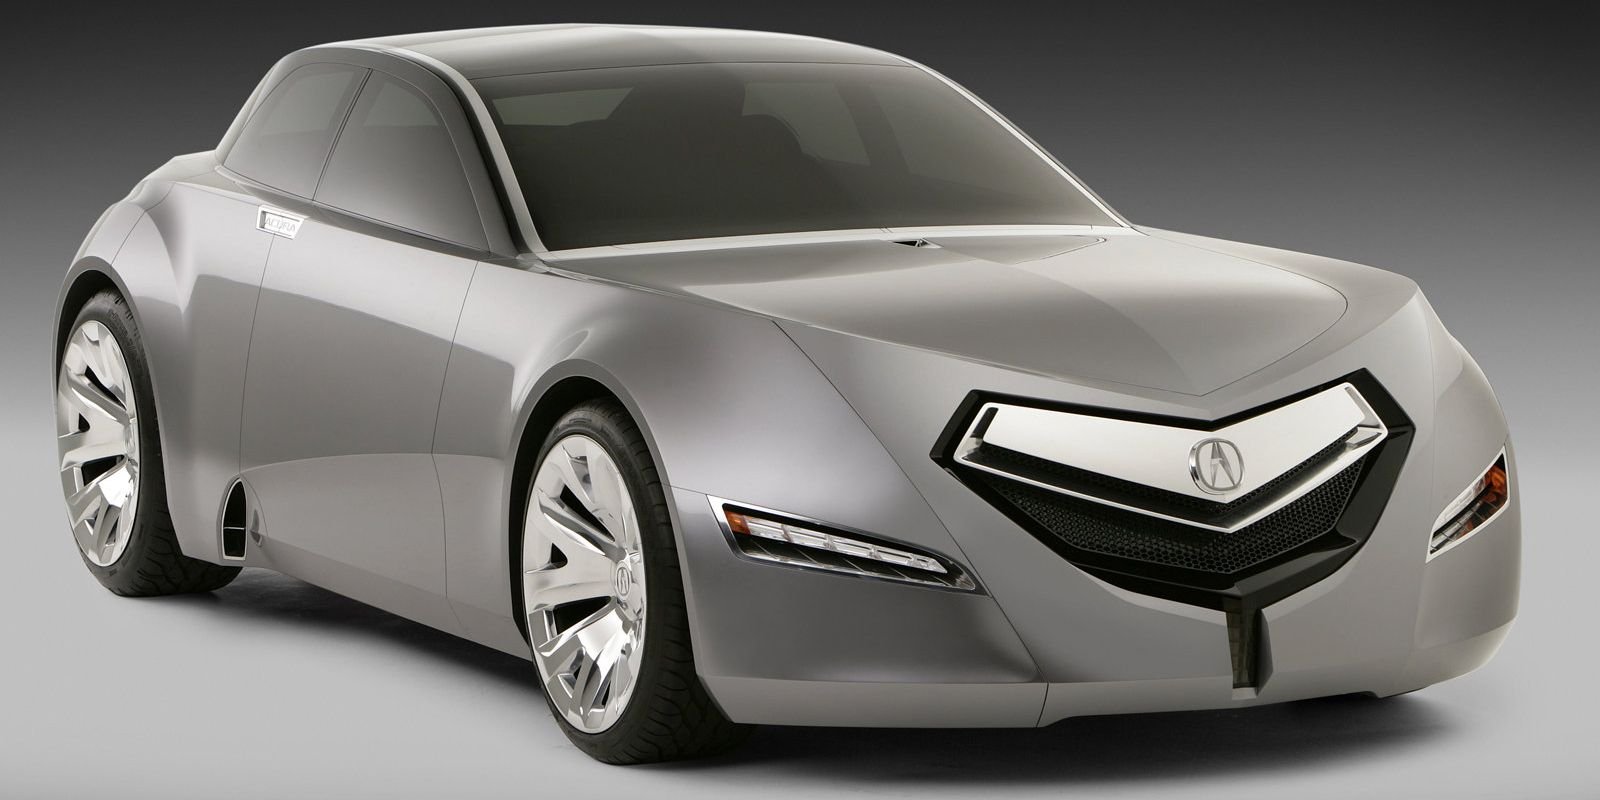 The 15 Ugliest Concept Cars Ever Made